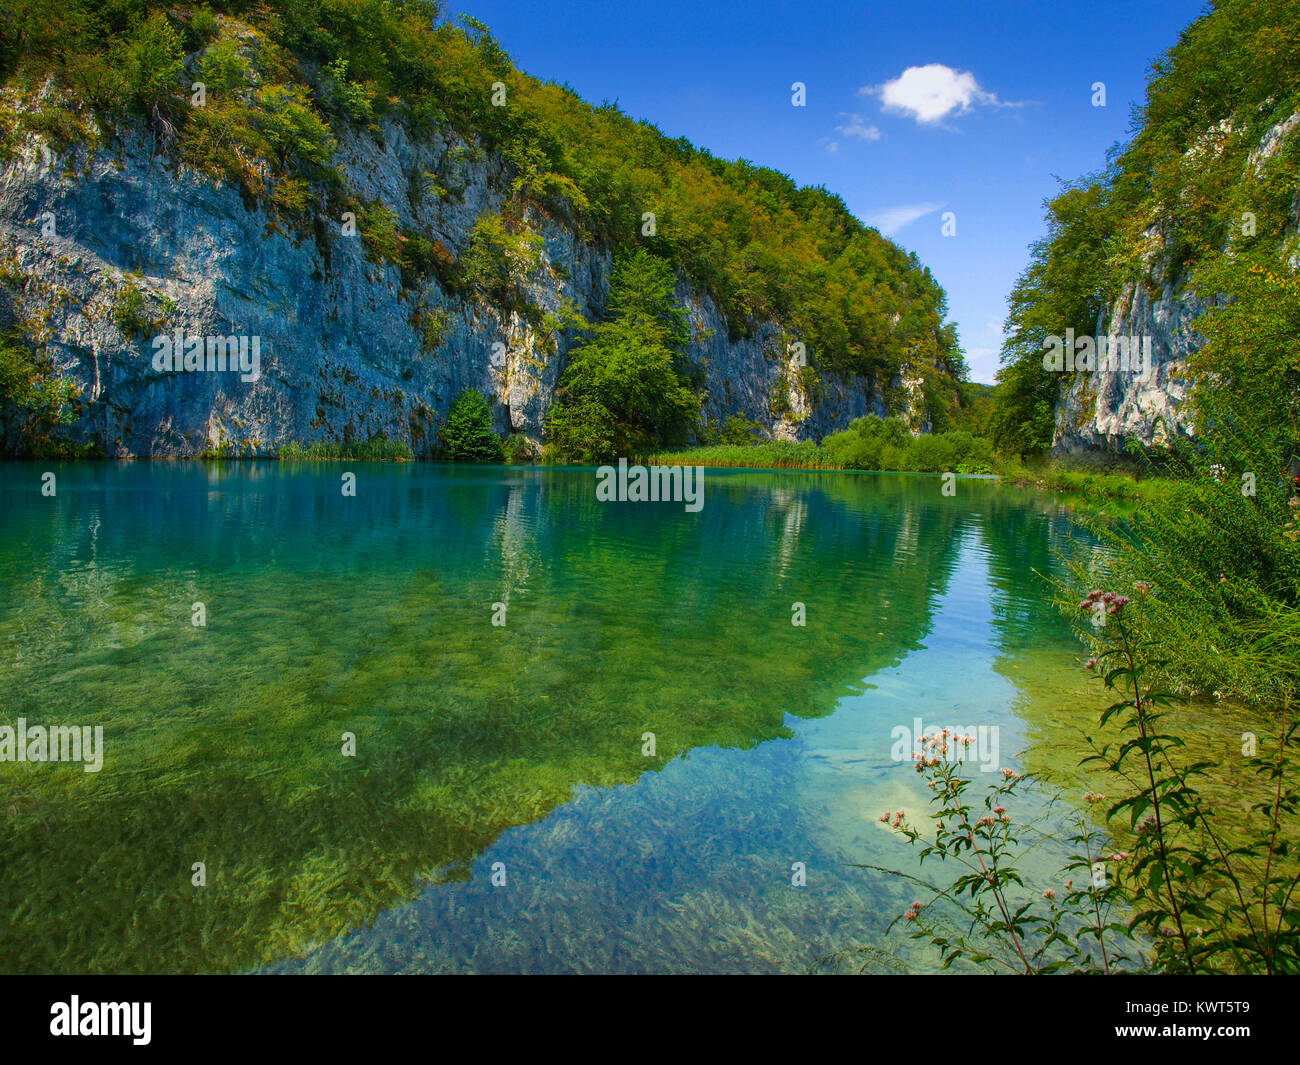 Plitvice National Park landscape with beautiful clear lakes and blue sky Stock Photo